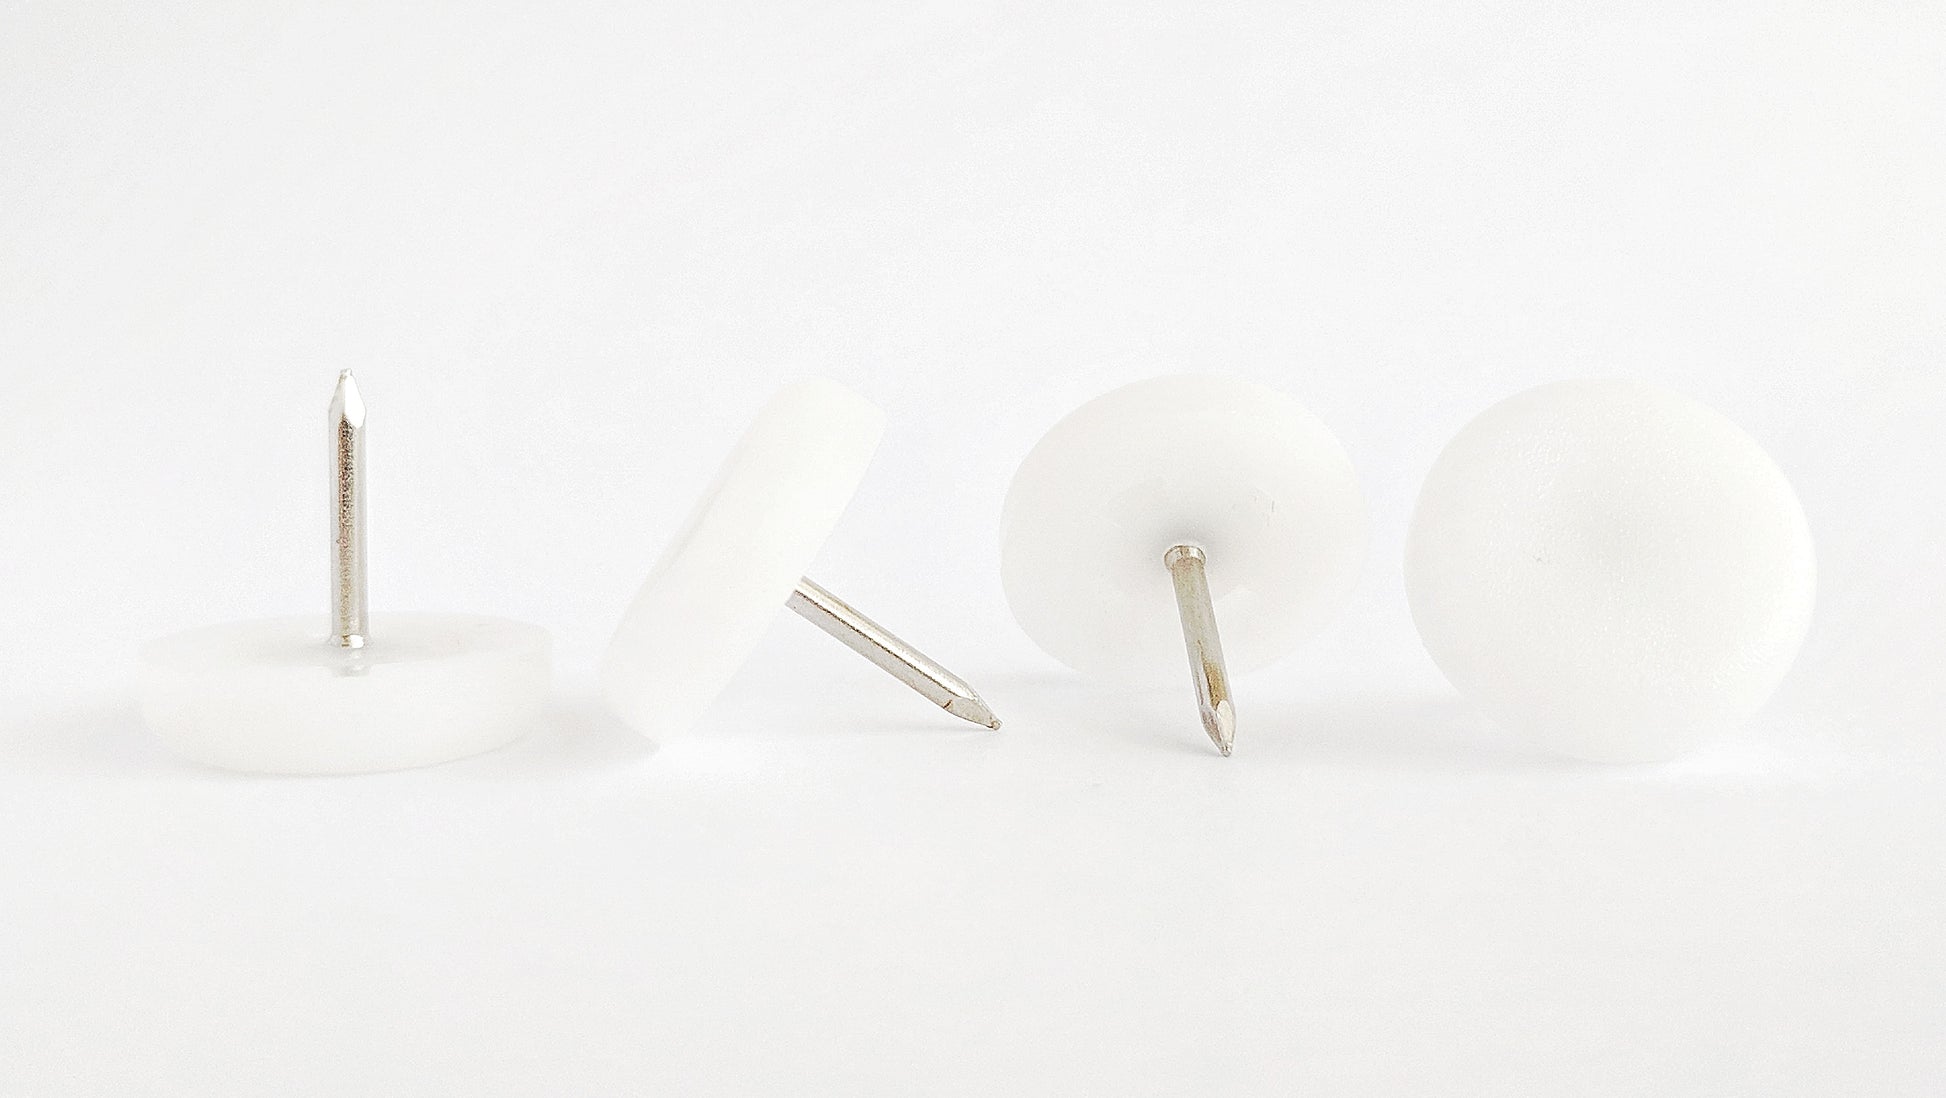 22mm White Plastic Nail On Gliders - Made in Germany - Keay Vital Parts